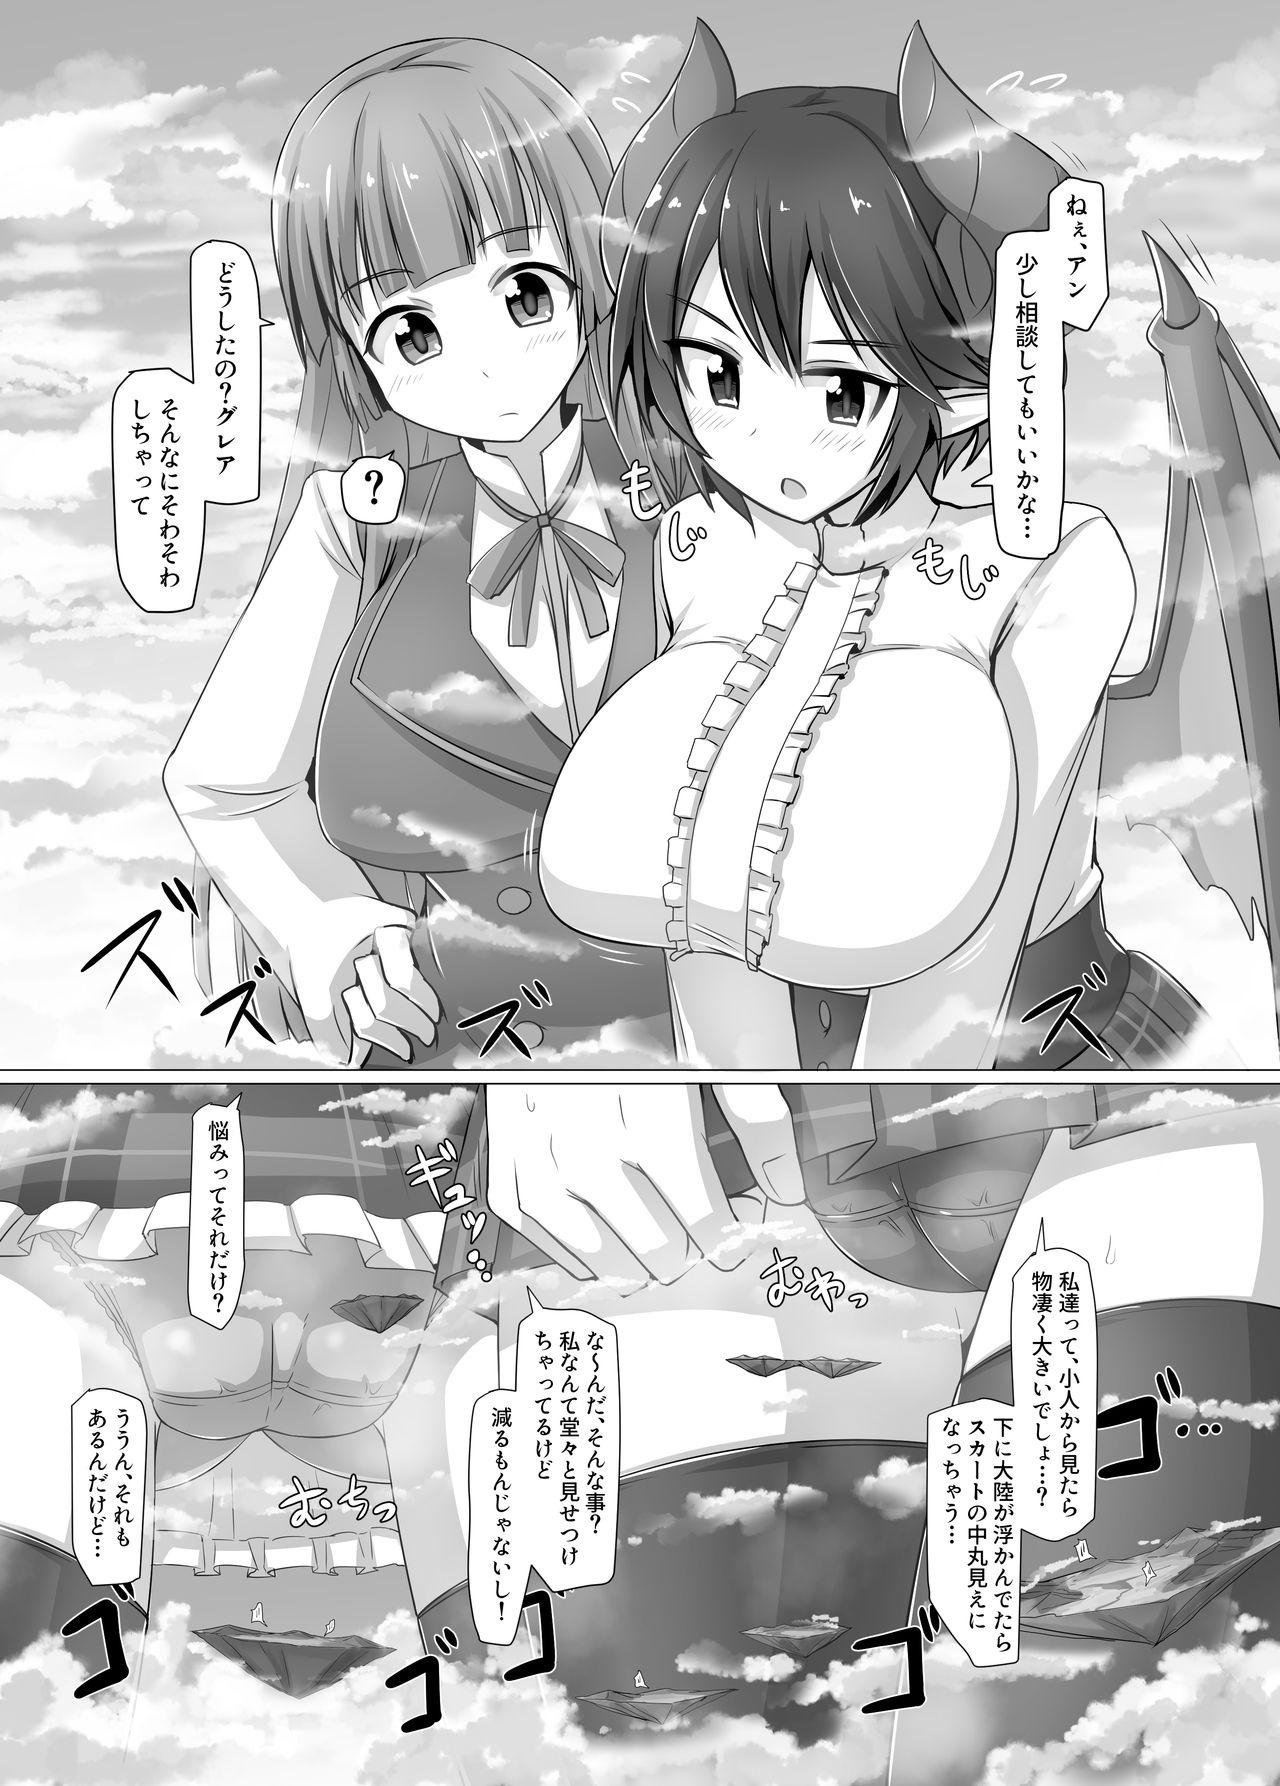 Staxxx Gigantic Gas Situation - Manaria friends Bubble - Page 2